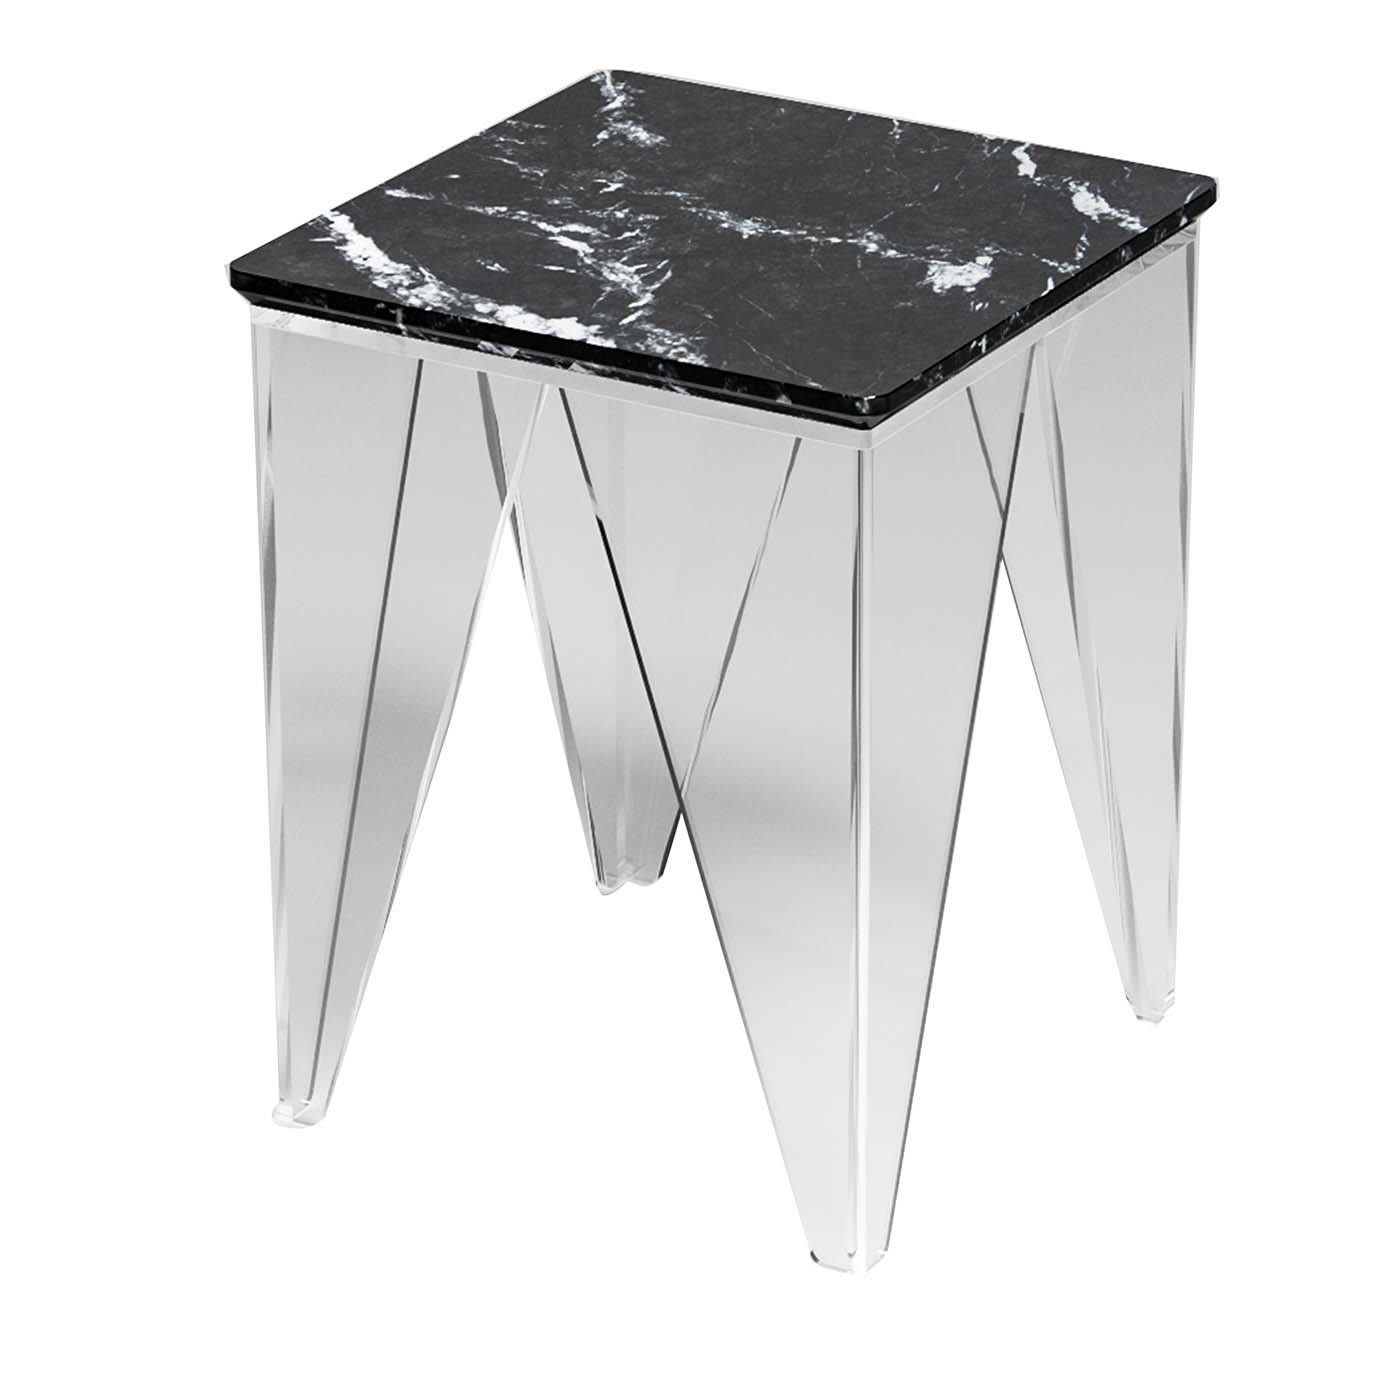 Vein Side Table with Gray Carnico Marble Top - Madea Milano